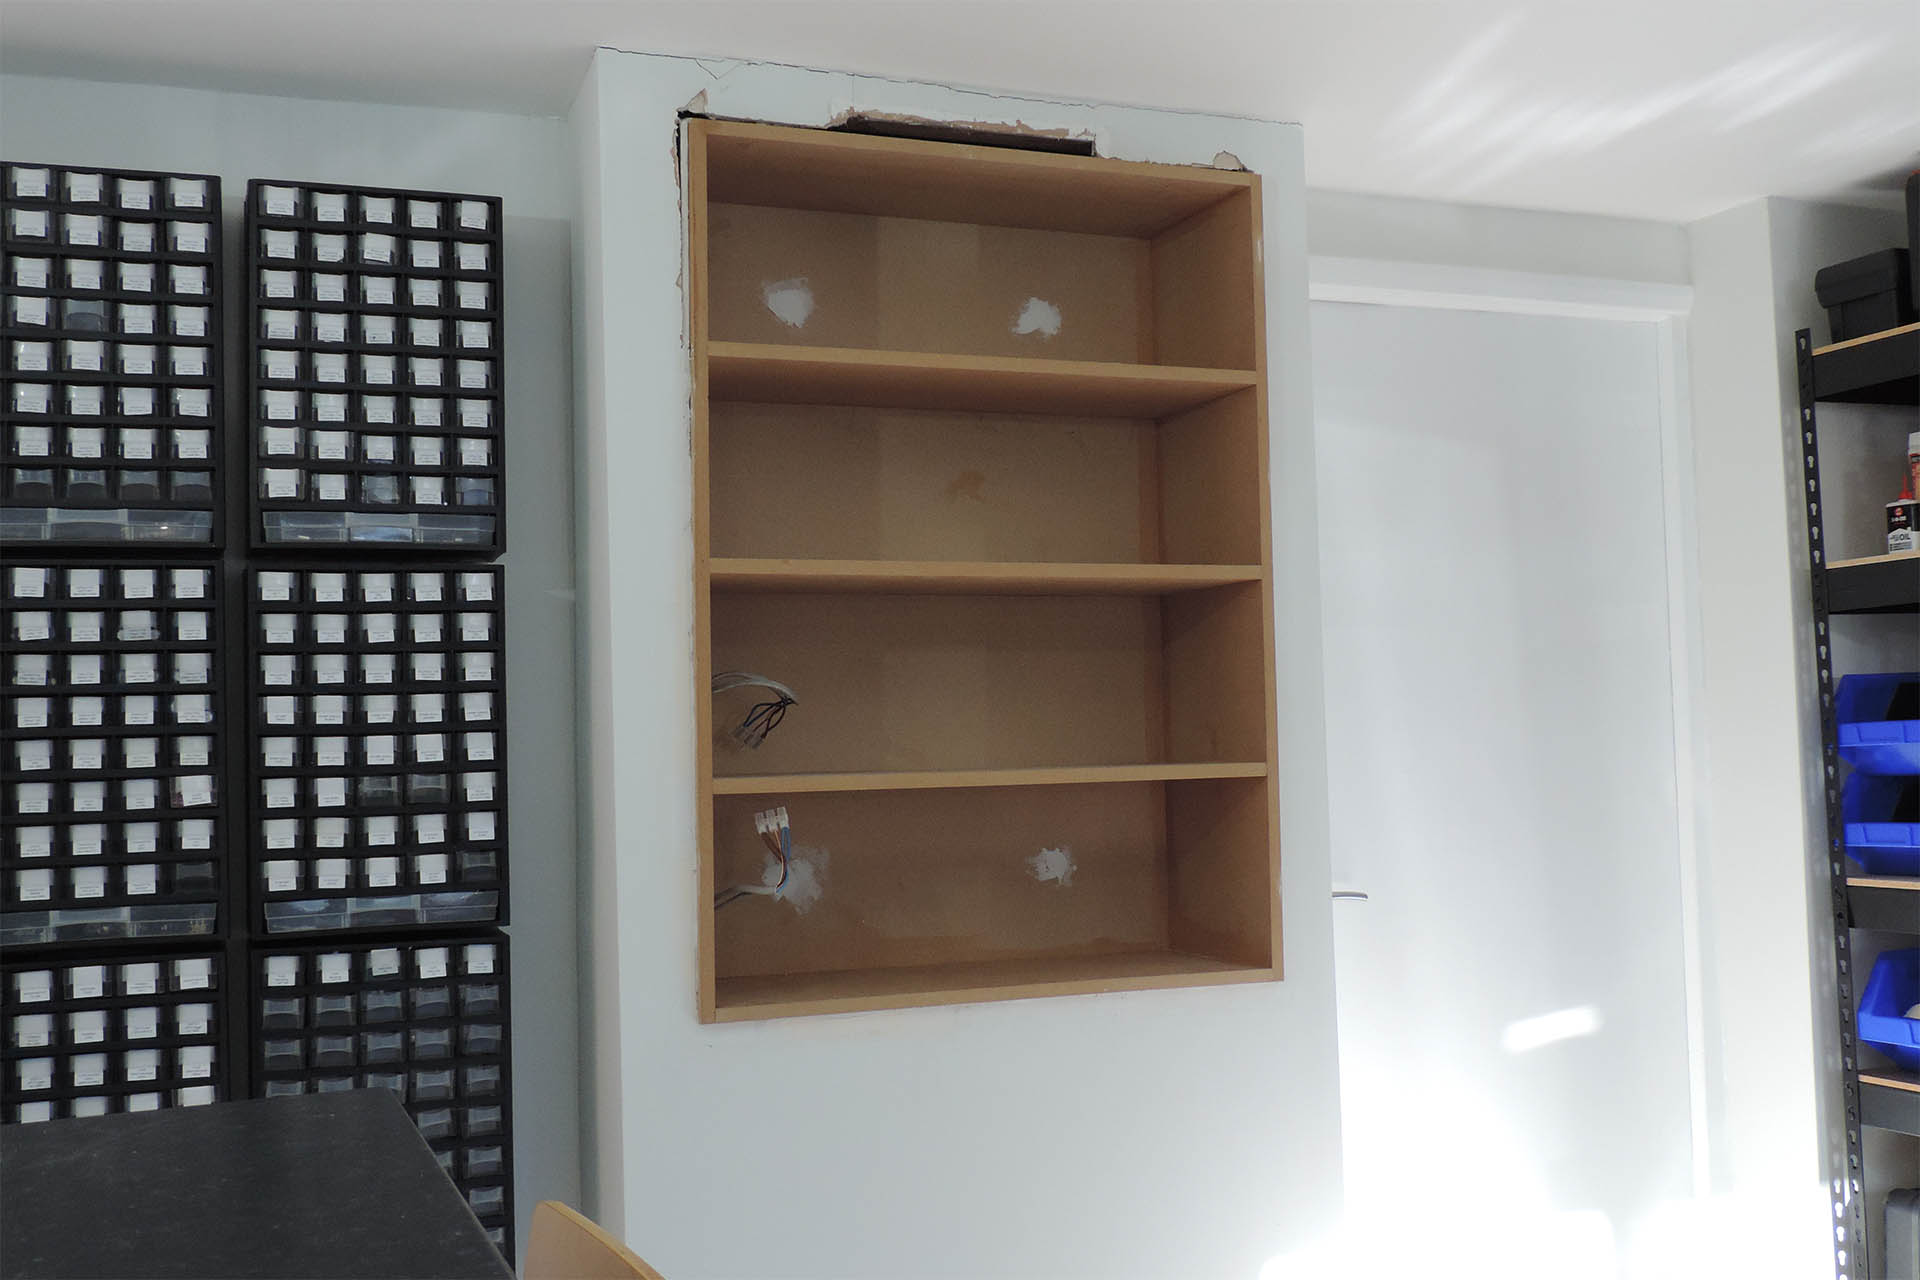 Shelf unit in place and secure